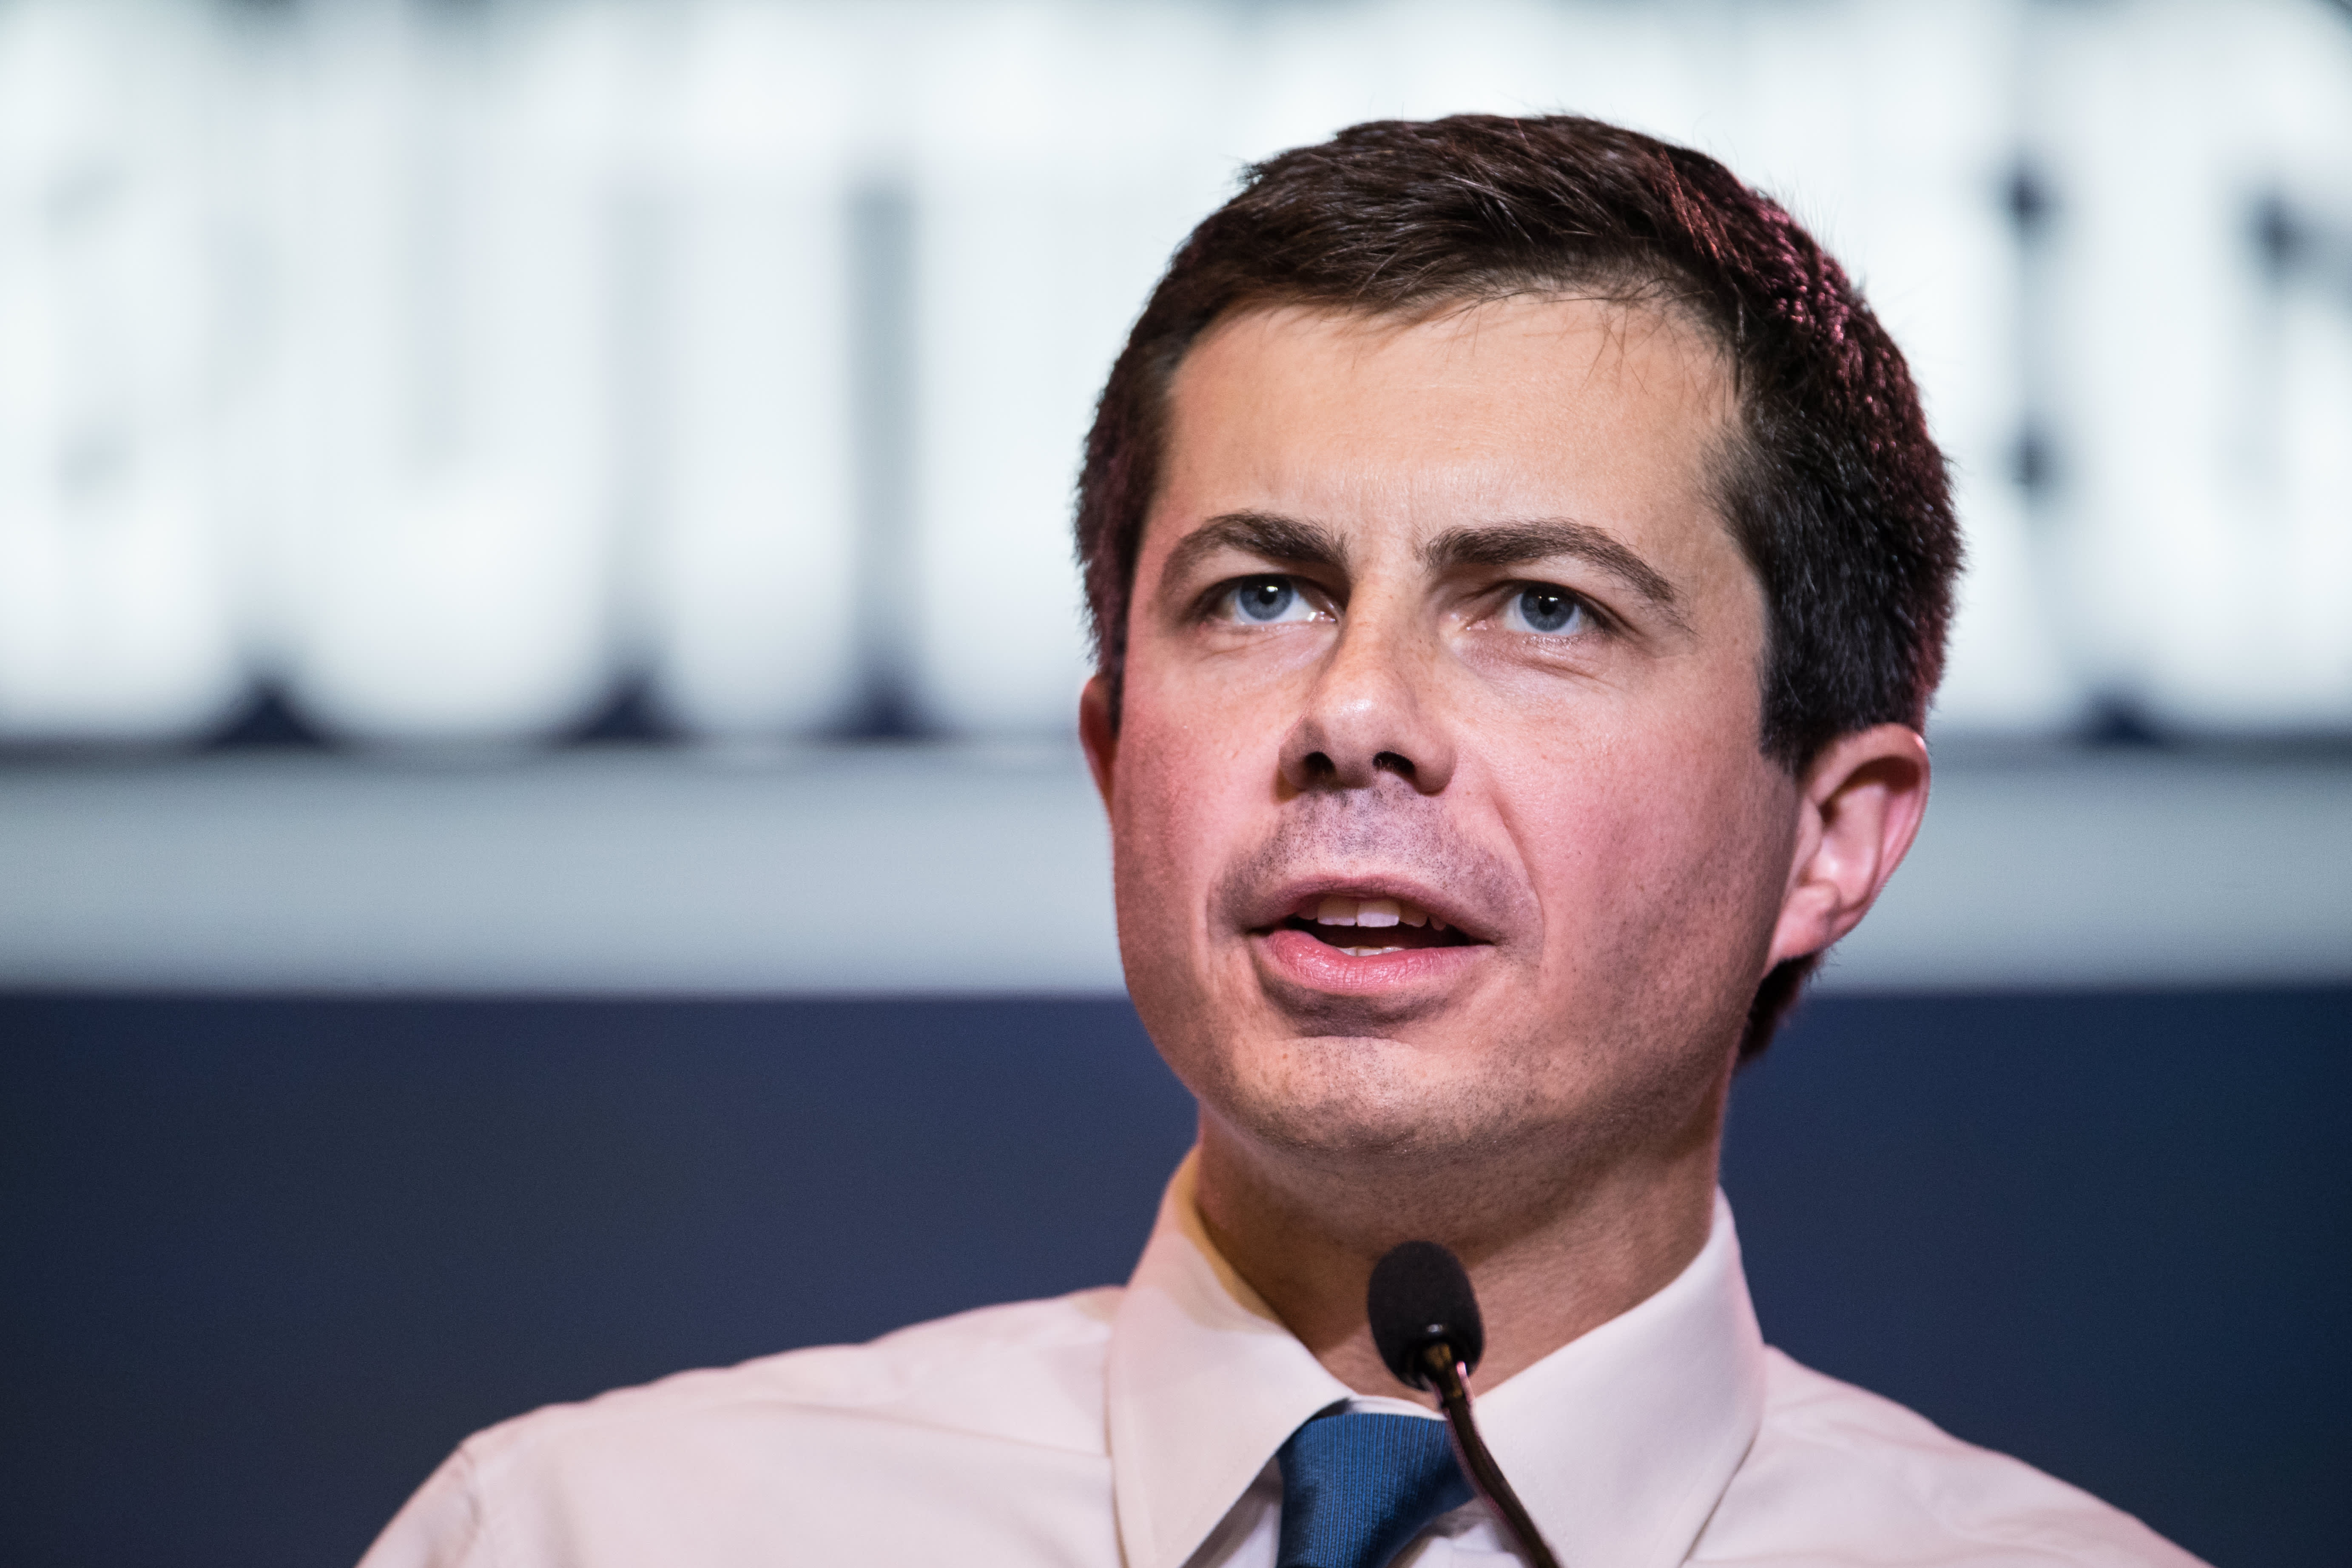 Pete Buttigieg unveils climate change plan that would cost more than $1 trillion and aim to create 3 million clean energy jobs - CNBC